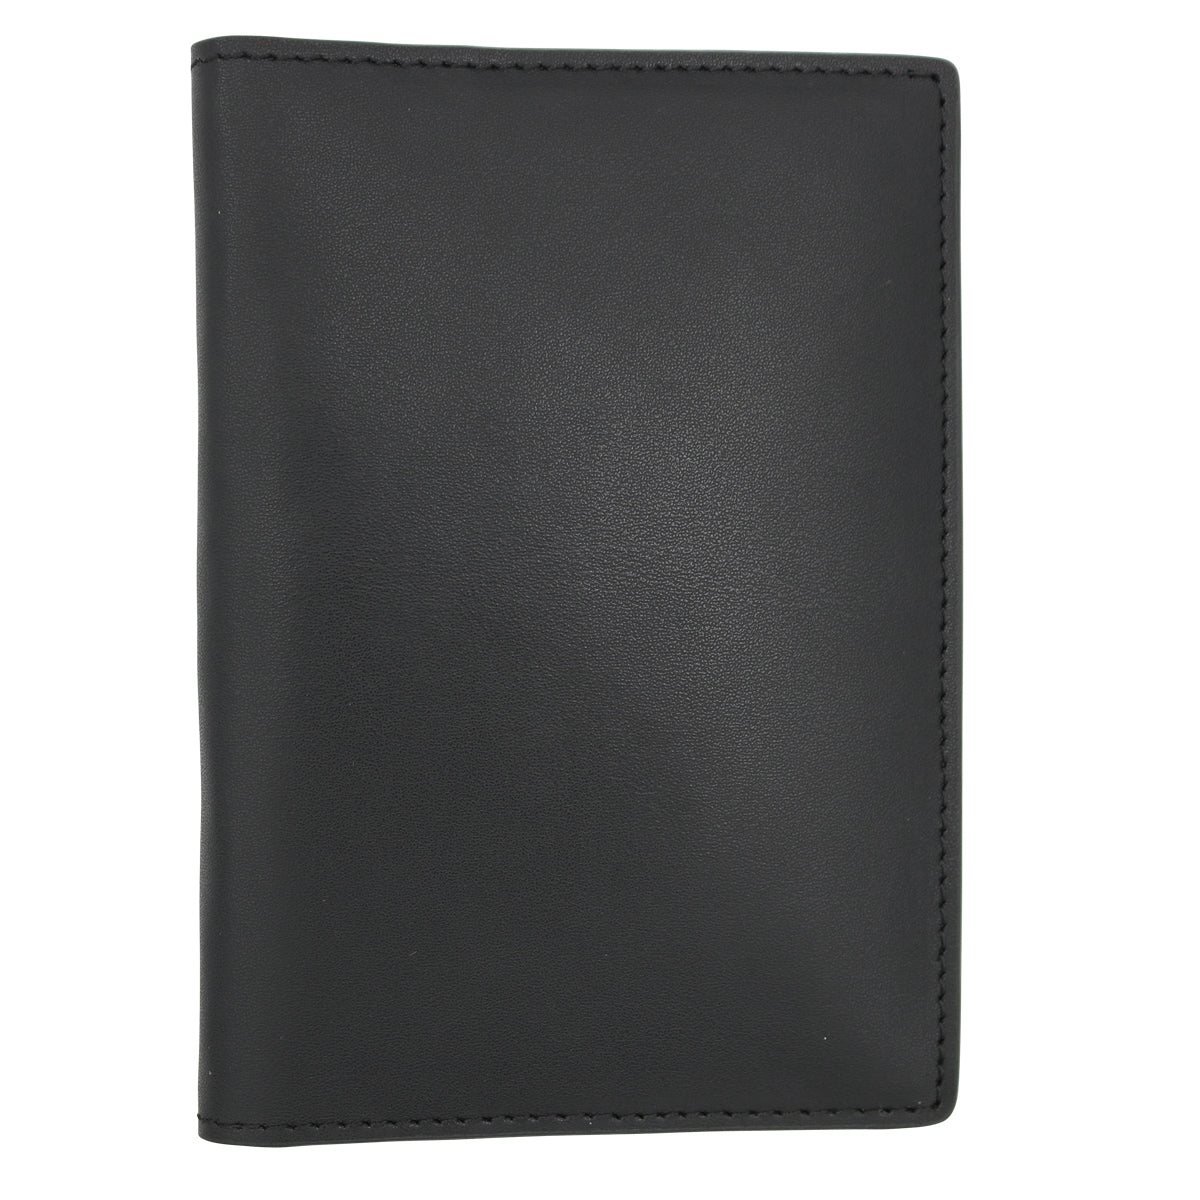 Paperthinks Recycled Leather Passport Cover Black